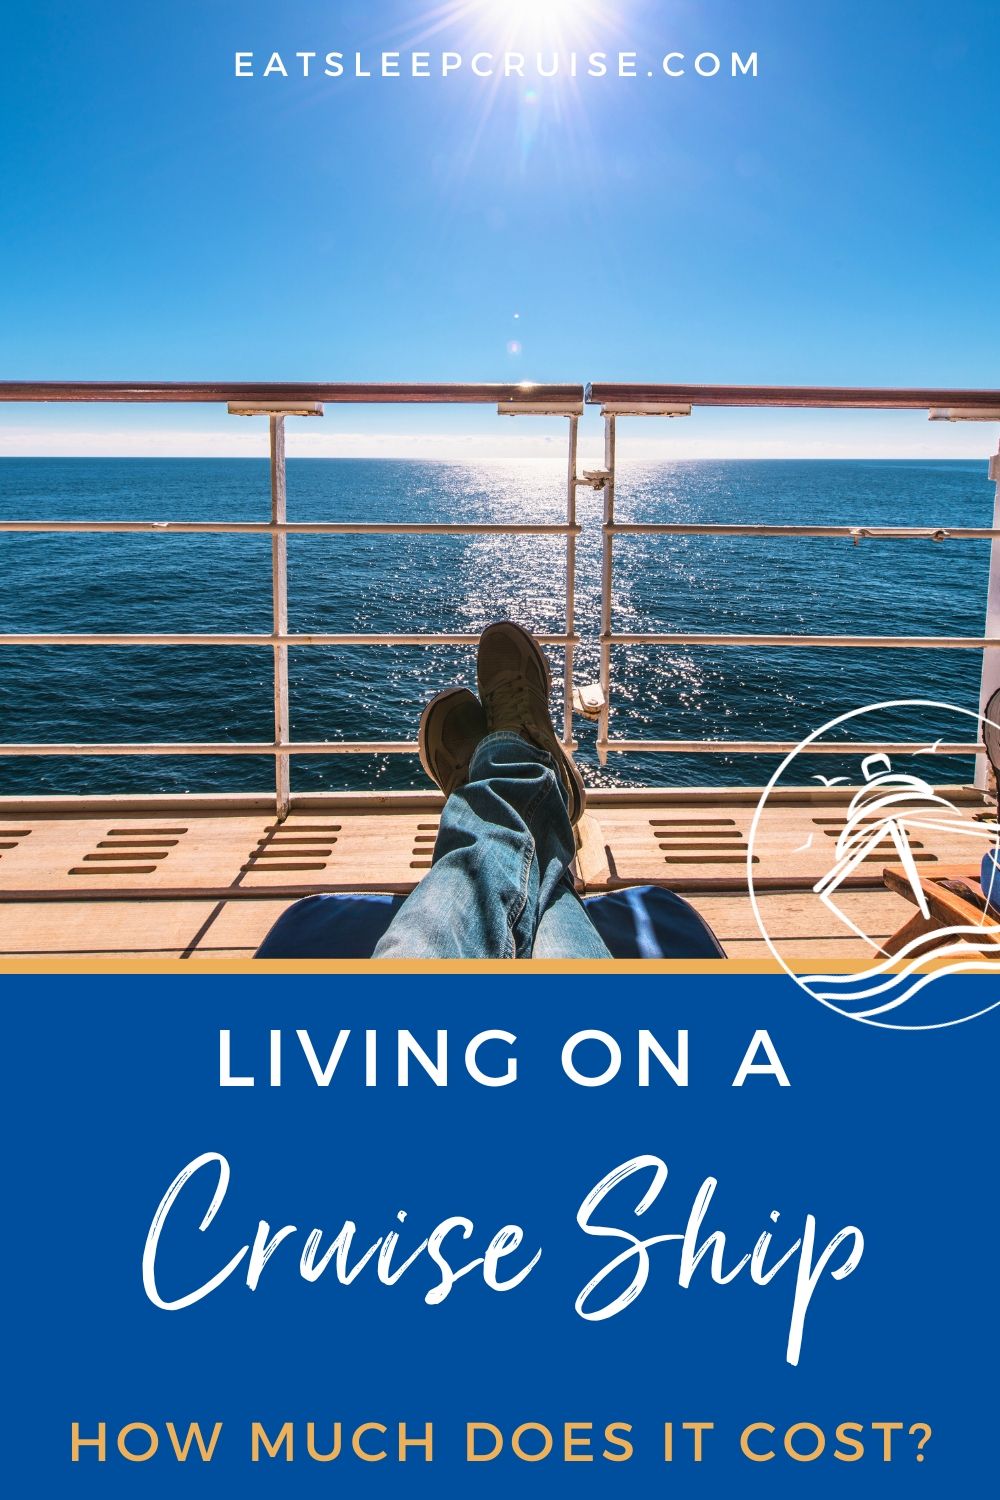 How much does it cost to live on a cruise ship